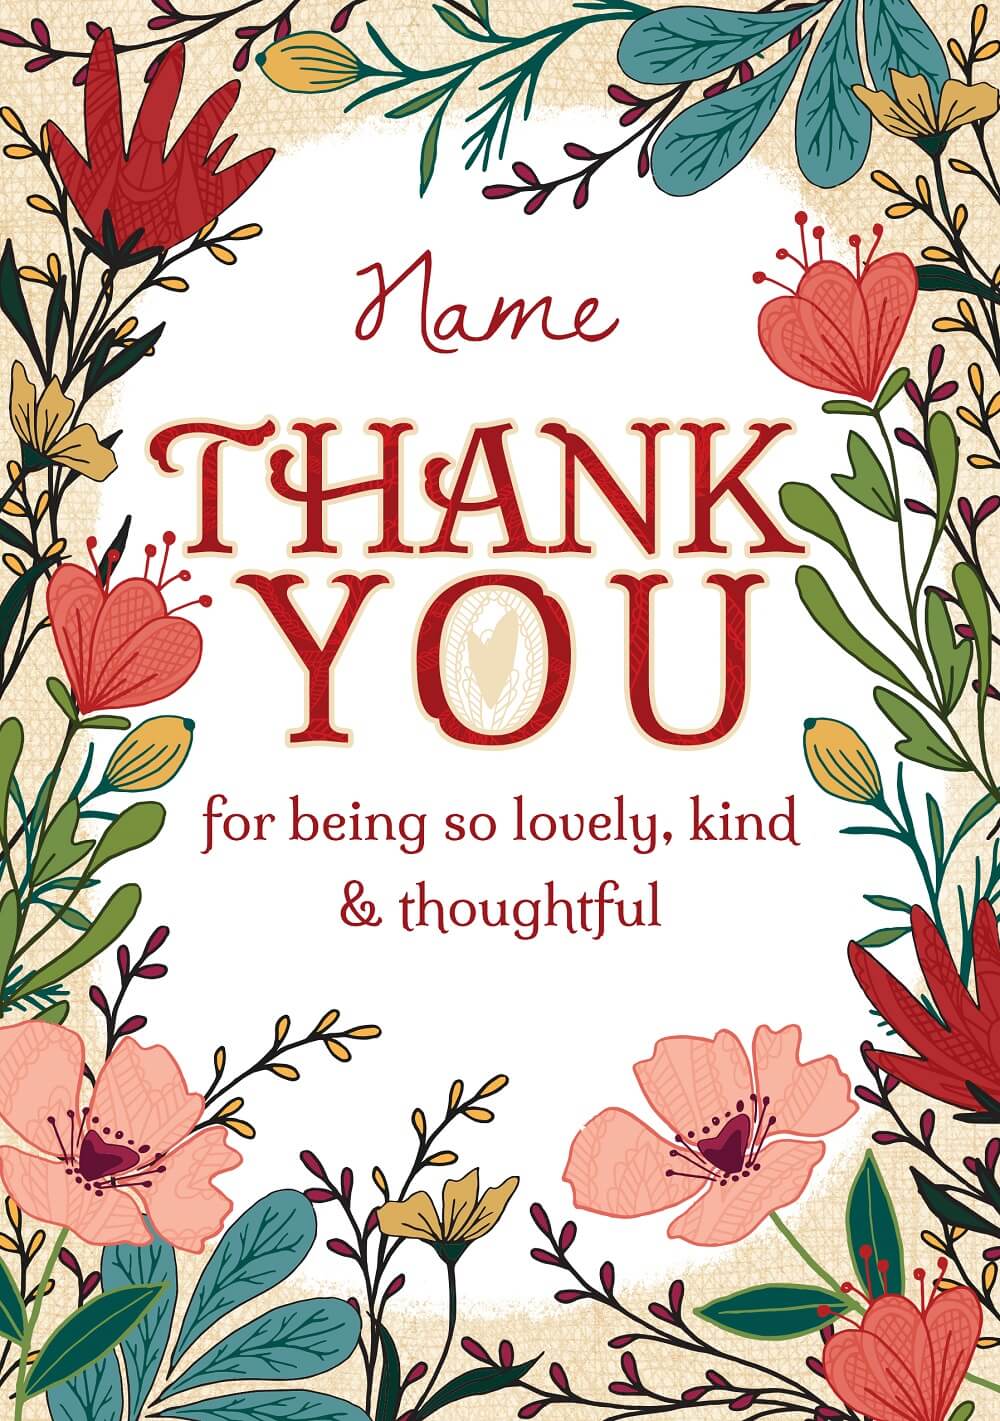 Thank You Messages What To Write In A Card | Images and Photos finder